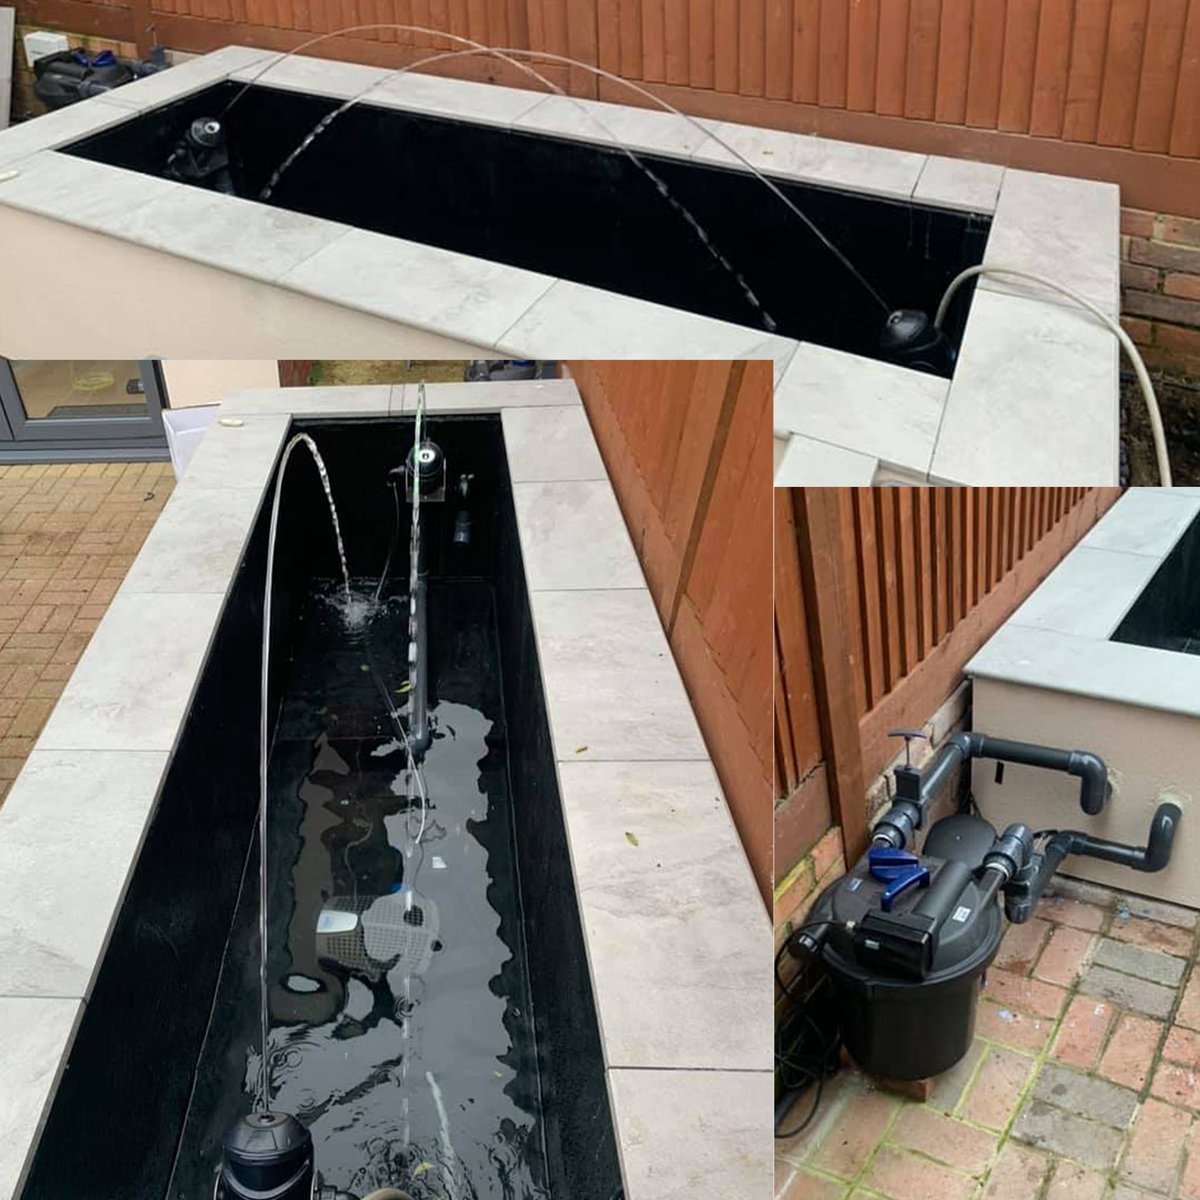 The team at JR Aqua Landscapes shared this small fountain pool, designed by Aquatics Applied and packed with OASE equipment, provided by Water Garden Ltd. It's packed with OASE equipment, including a filter set and our Rainbow Jets. Follow their page here: bit.ly/3oMbibj